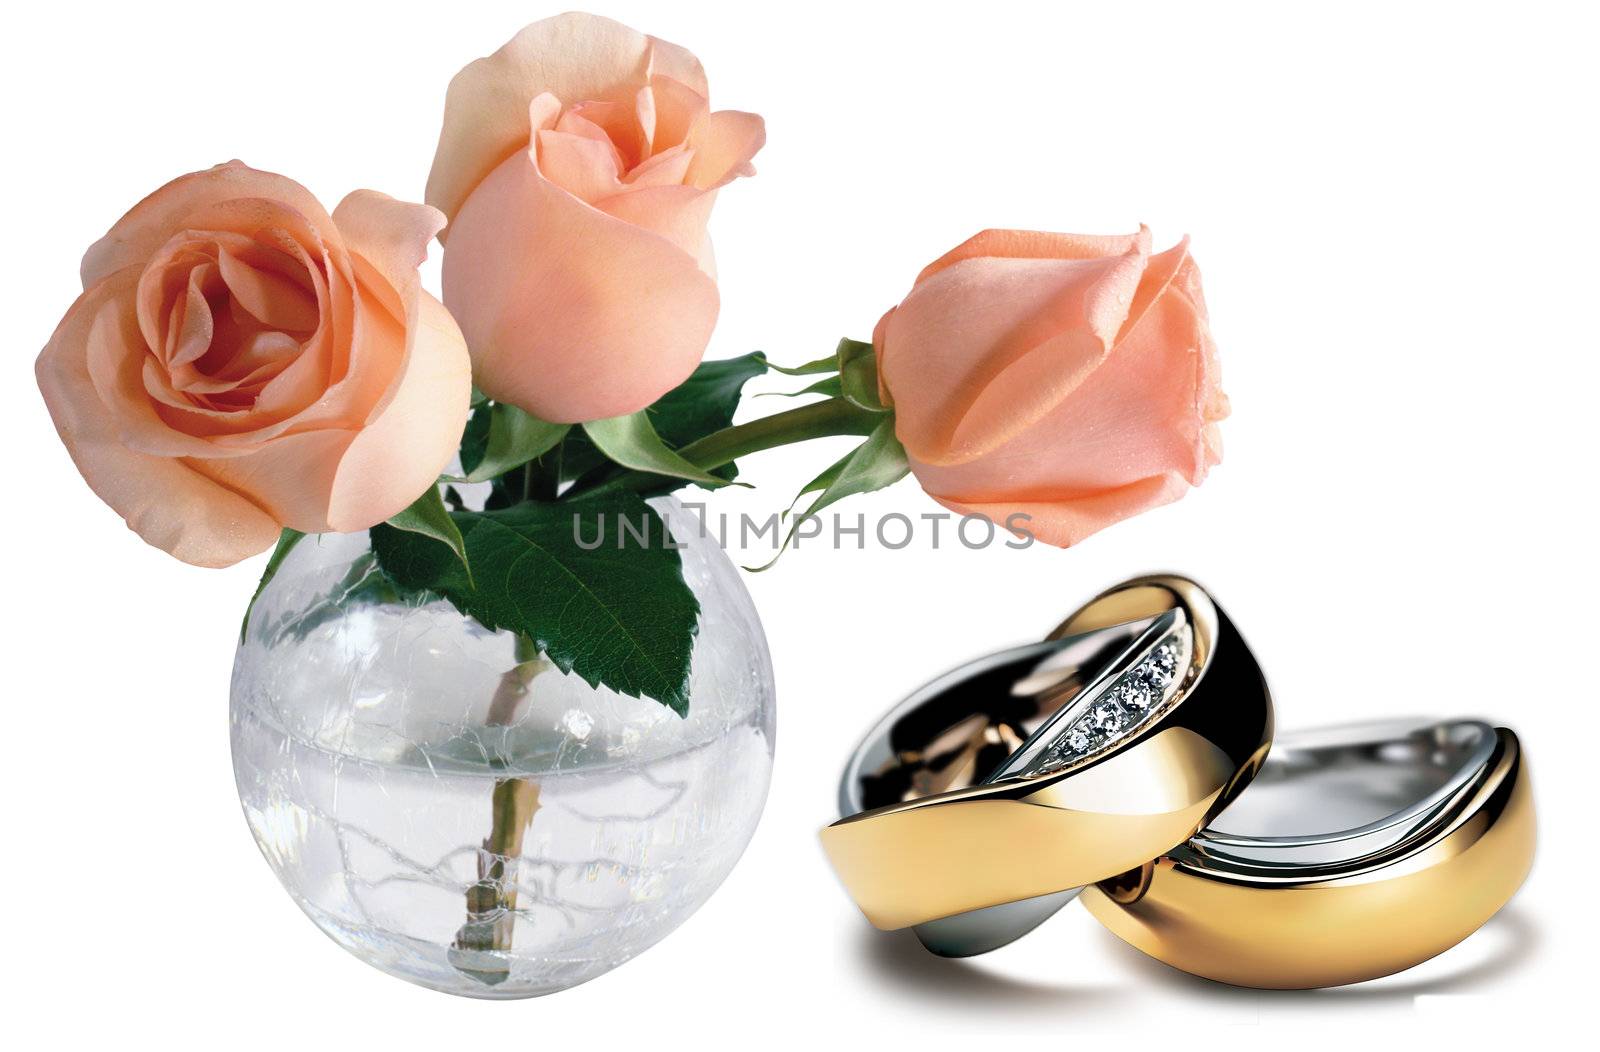 Nice beautiful situation from the roses and rings